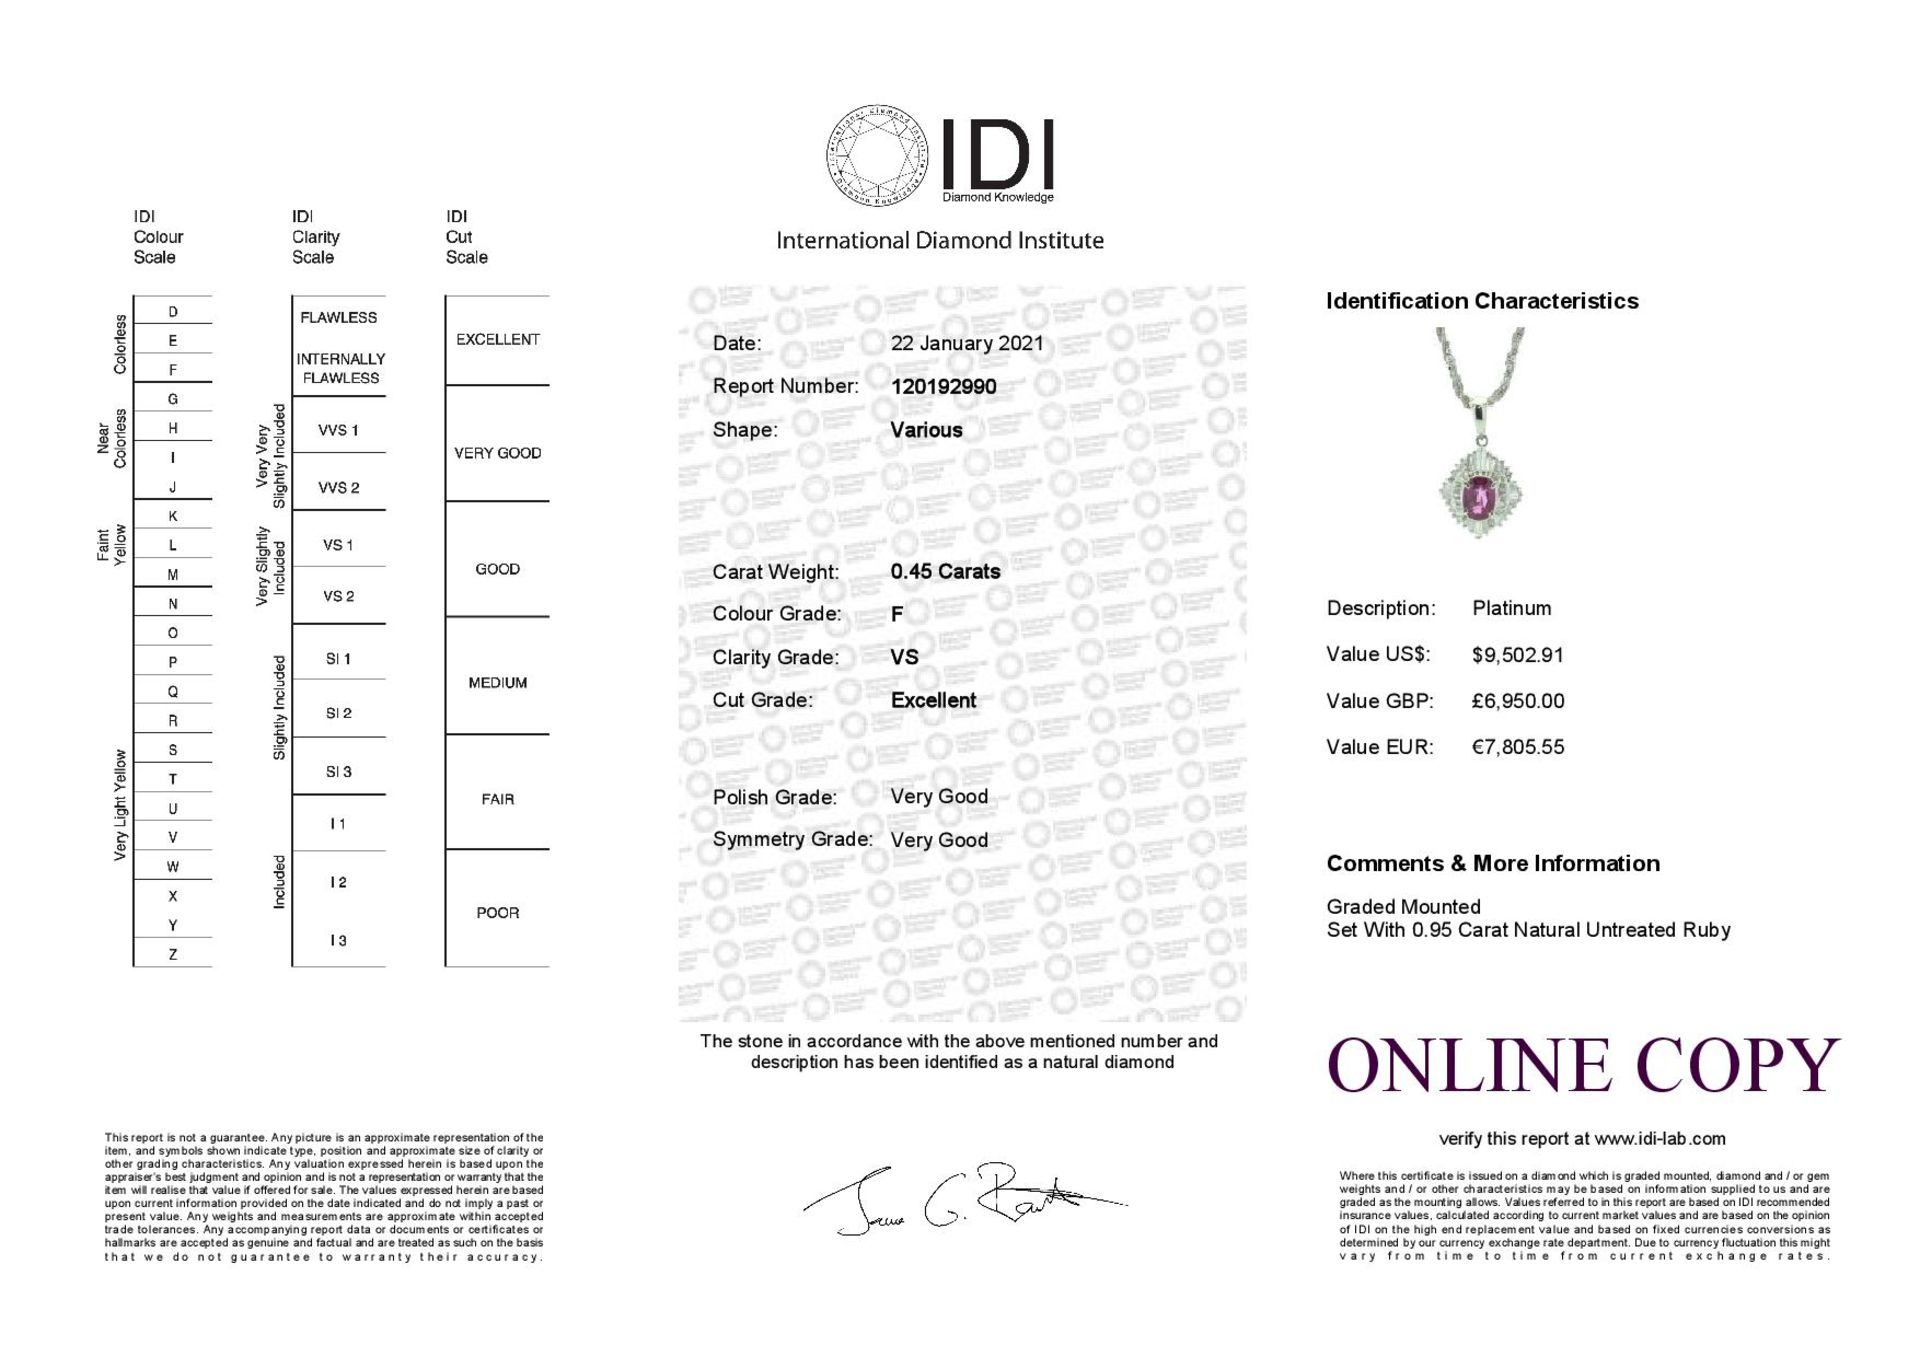 Platinum Cluster Diamond And Ruby Necklace (R0.95) 0.45 Carats - Valued by IDI £6,950.00 - - Image 3 of 3